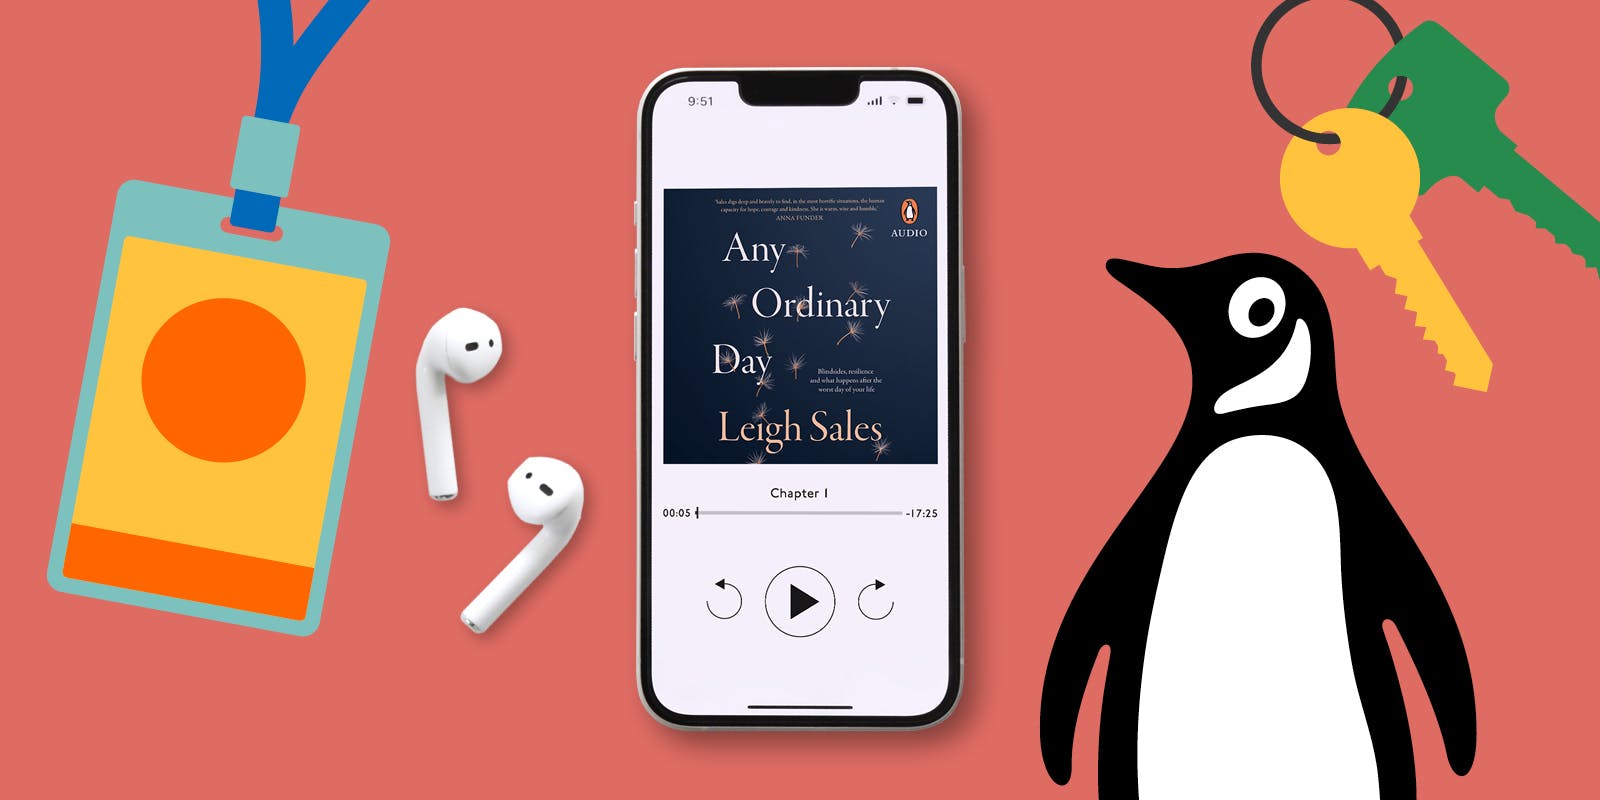 No time to sit down and read? Try an audiobook to listen anywhere, any time